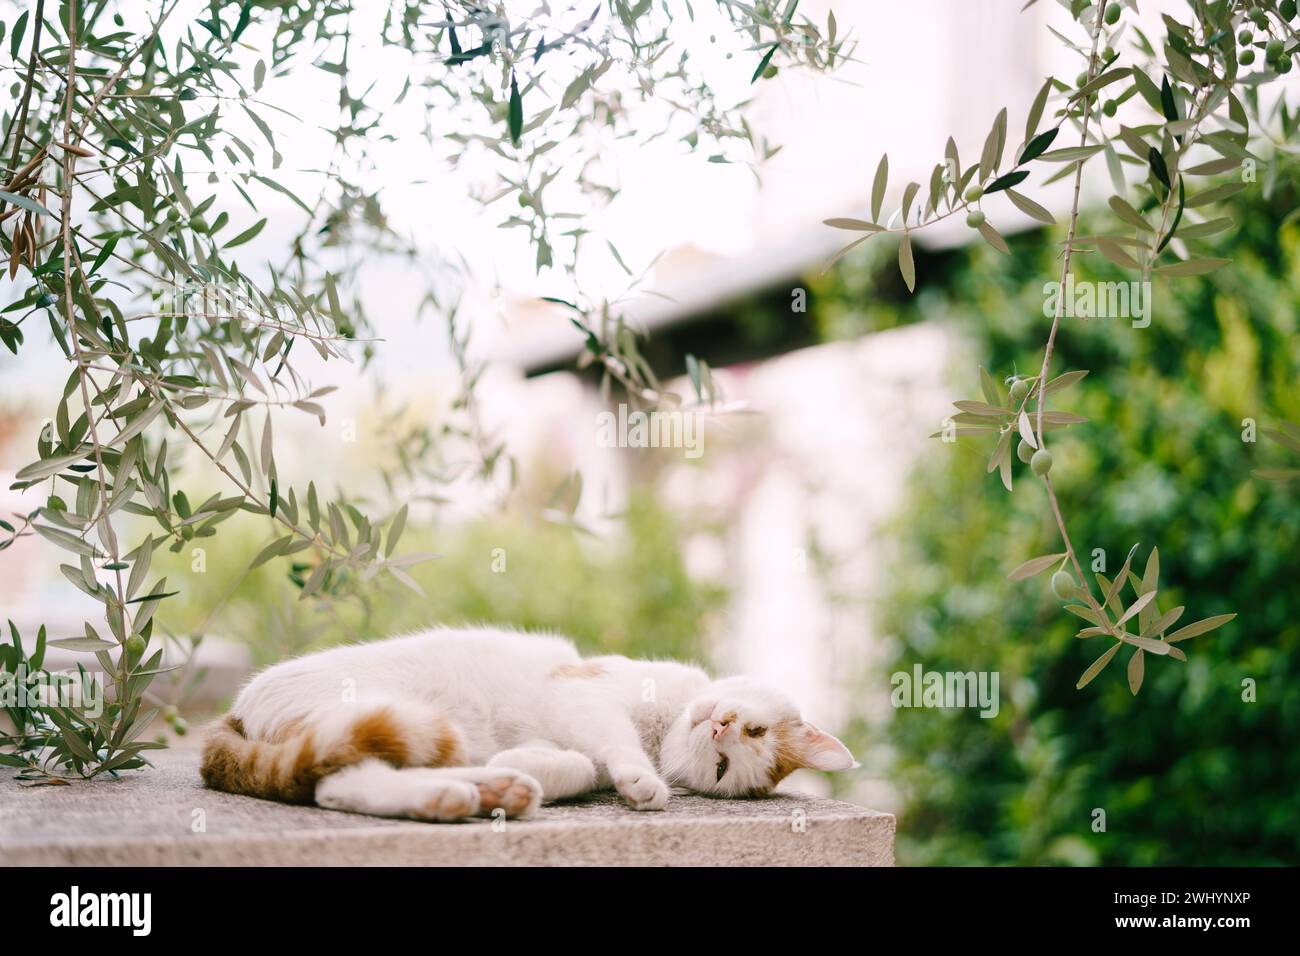 White-red cat is resting on a stone pillar under green olive branches Stock Photo